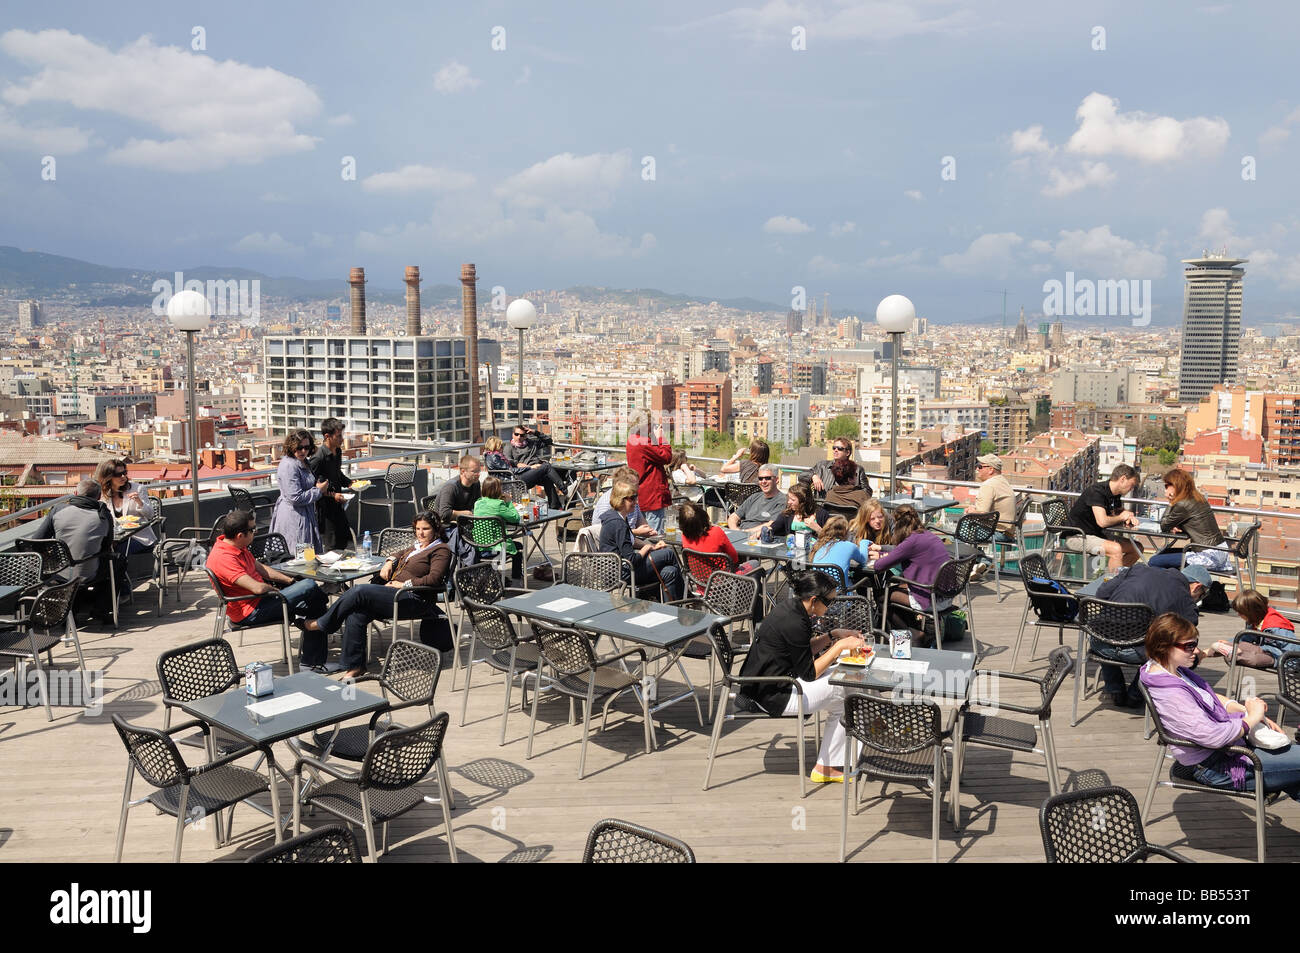 People in a cafe with a nice view over the city of Barcelona, Spain Stock Photo